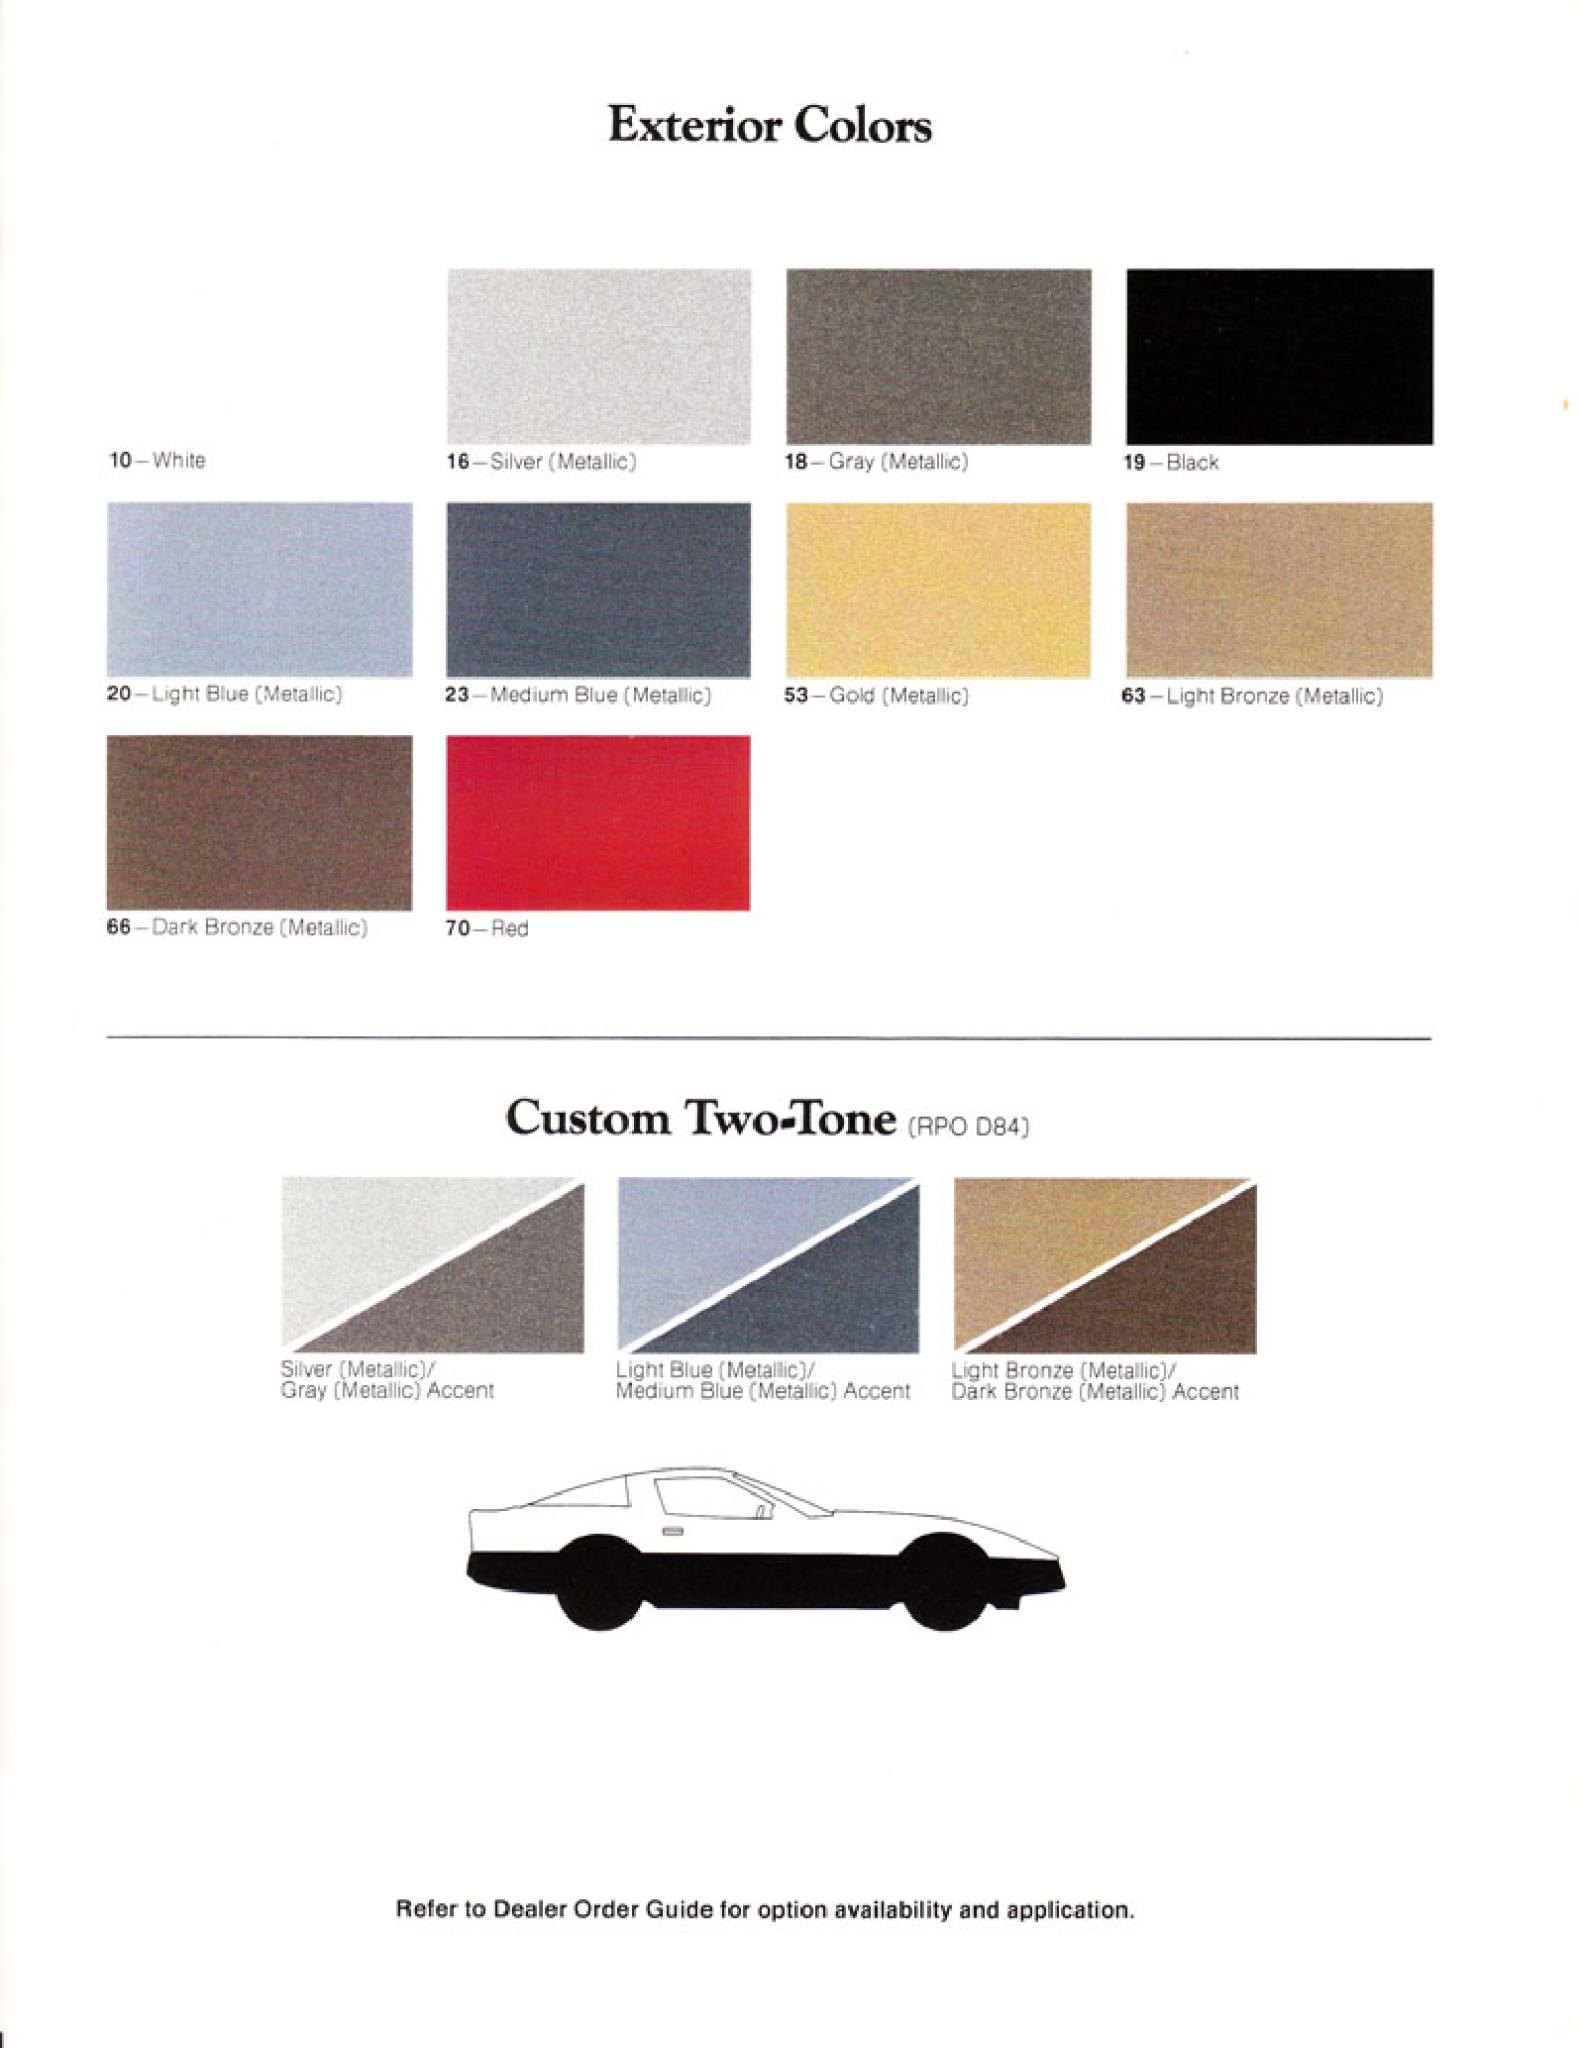 oem names, oem paint codes, and color shade example paint chips for the 1984 chevrolet corvette